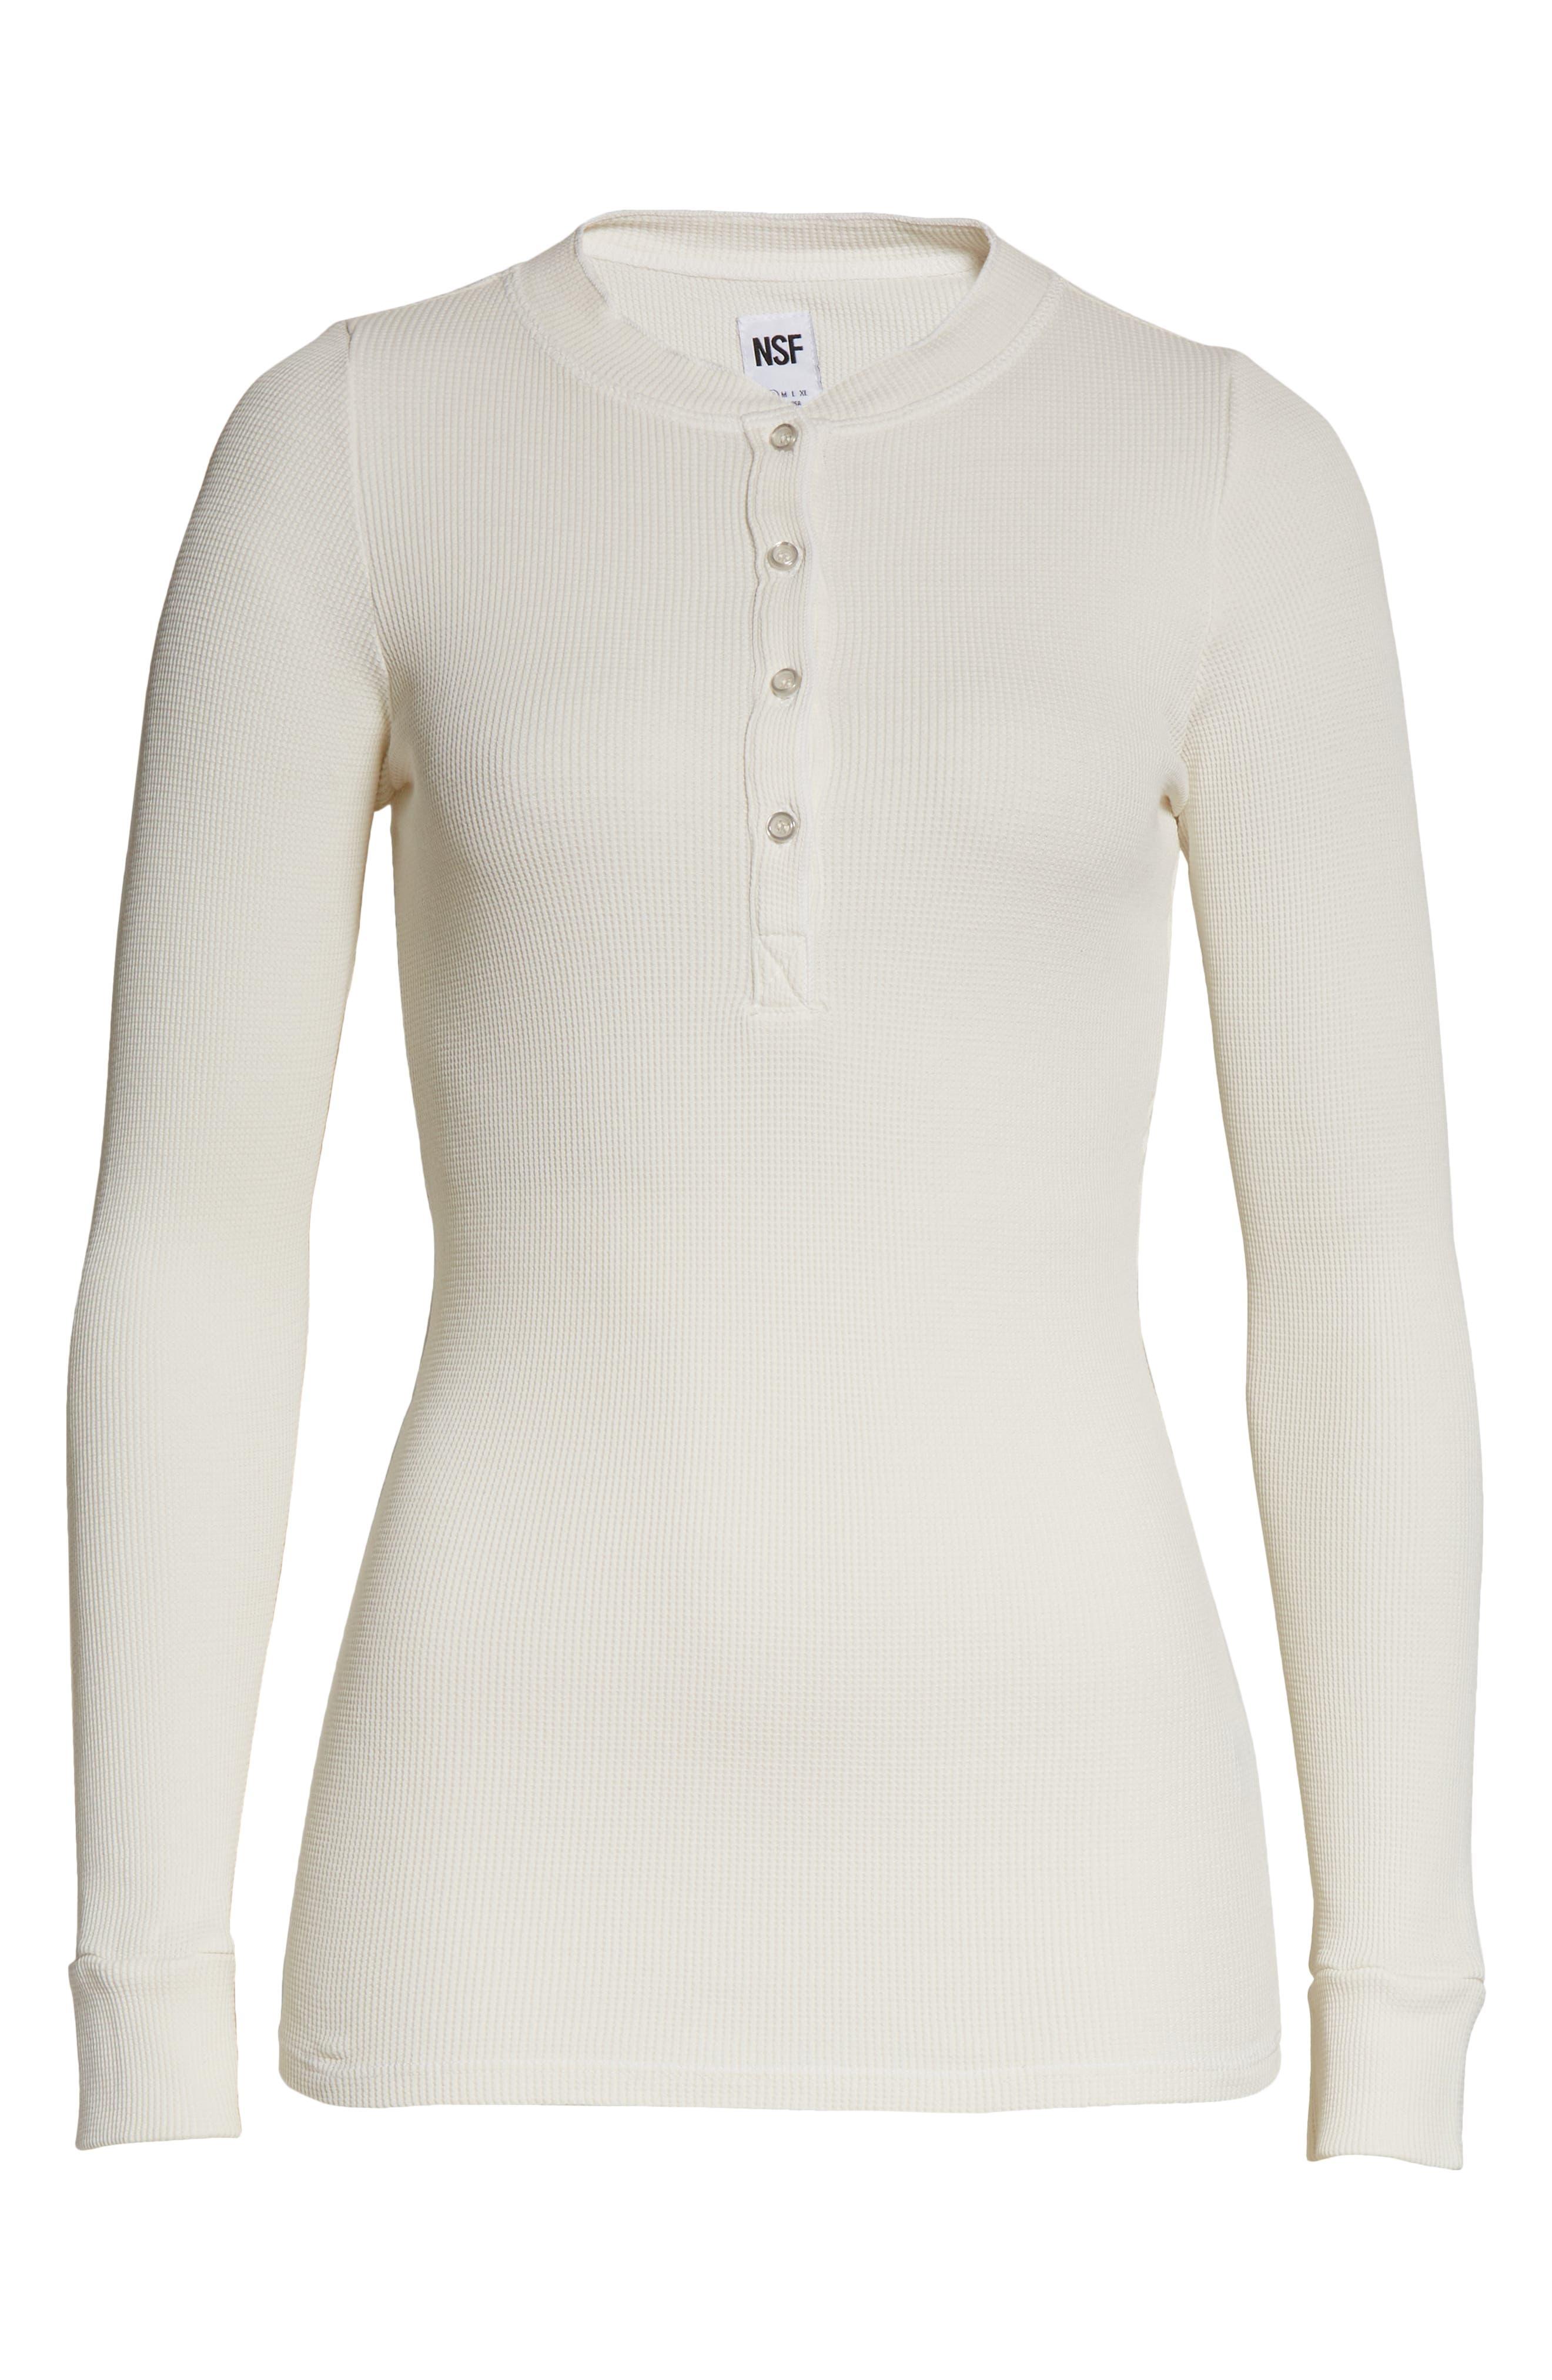 Bliss and Mischief Henri Slim Fit Thermal Henley Top In Soft White